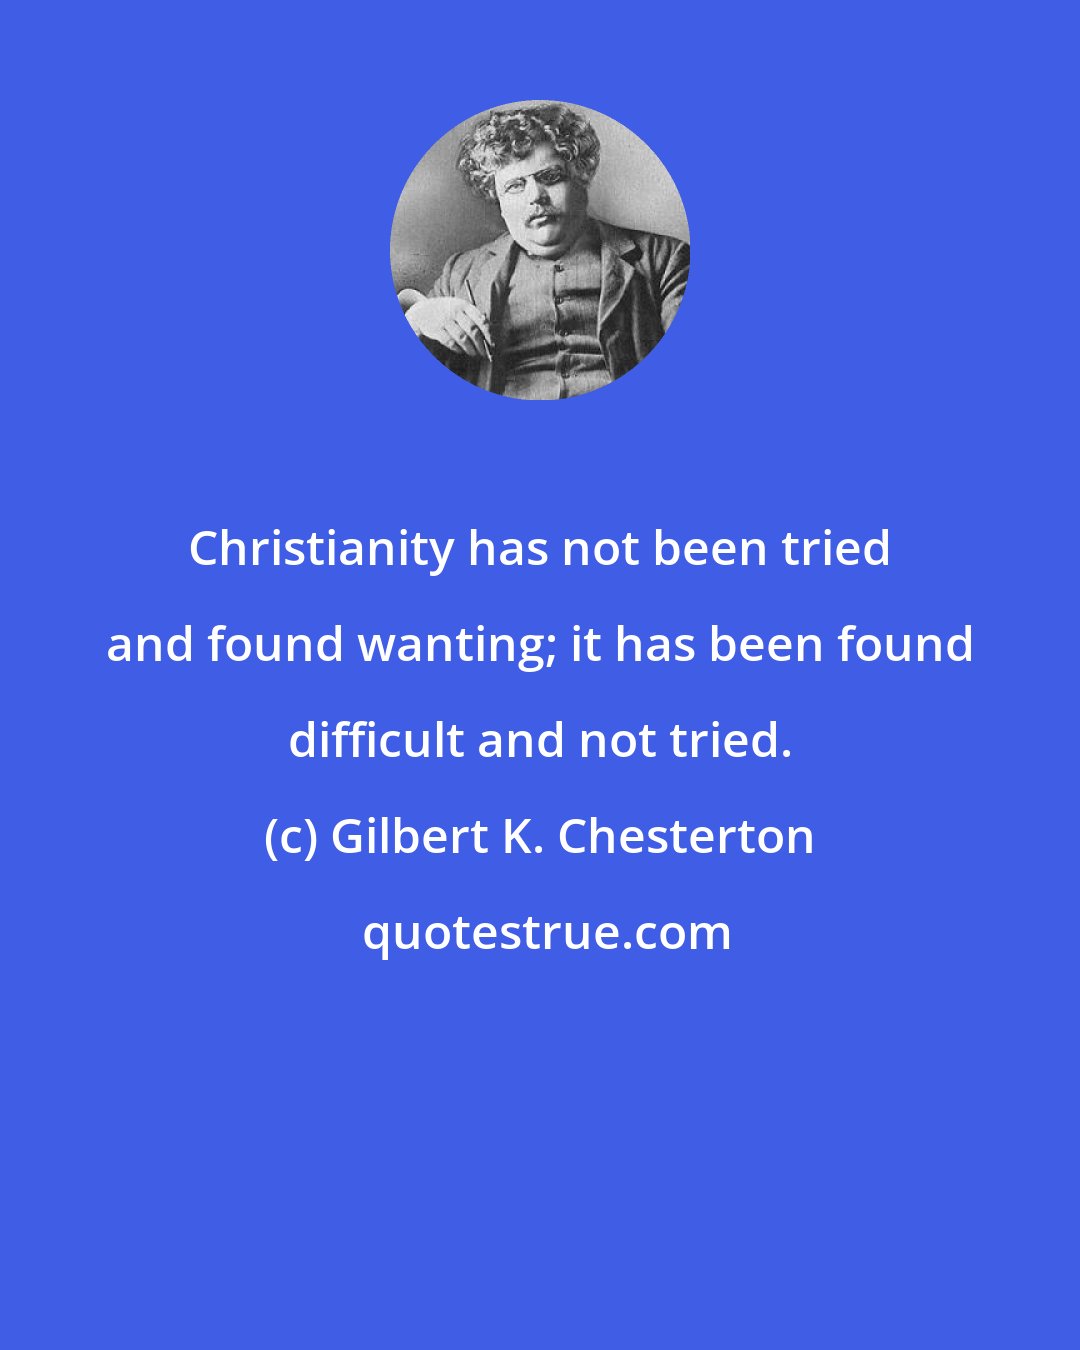 Gilbert K. Chesterton: Christianity has not been tried and found wanting; it has been found difficult and not tried.